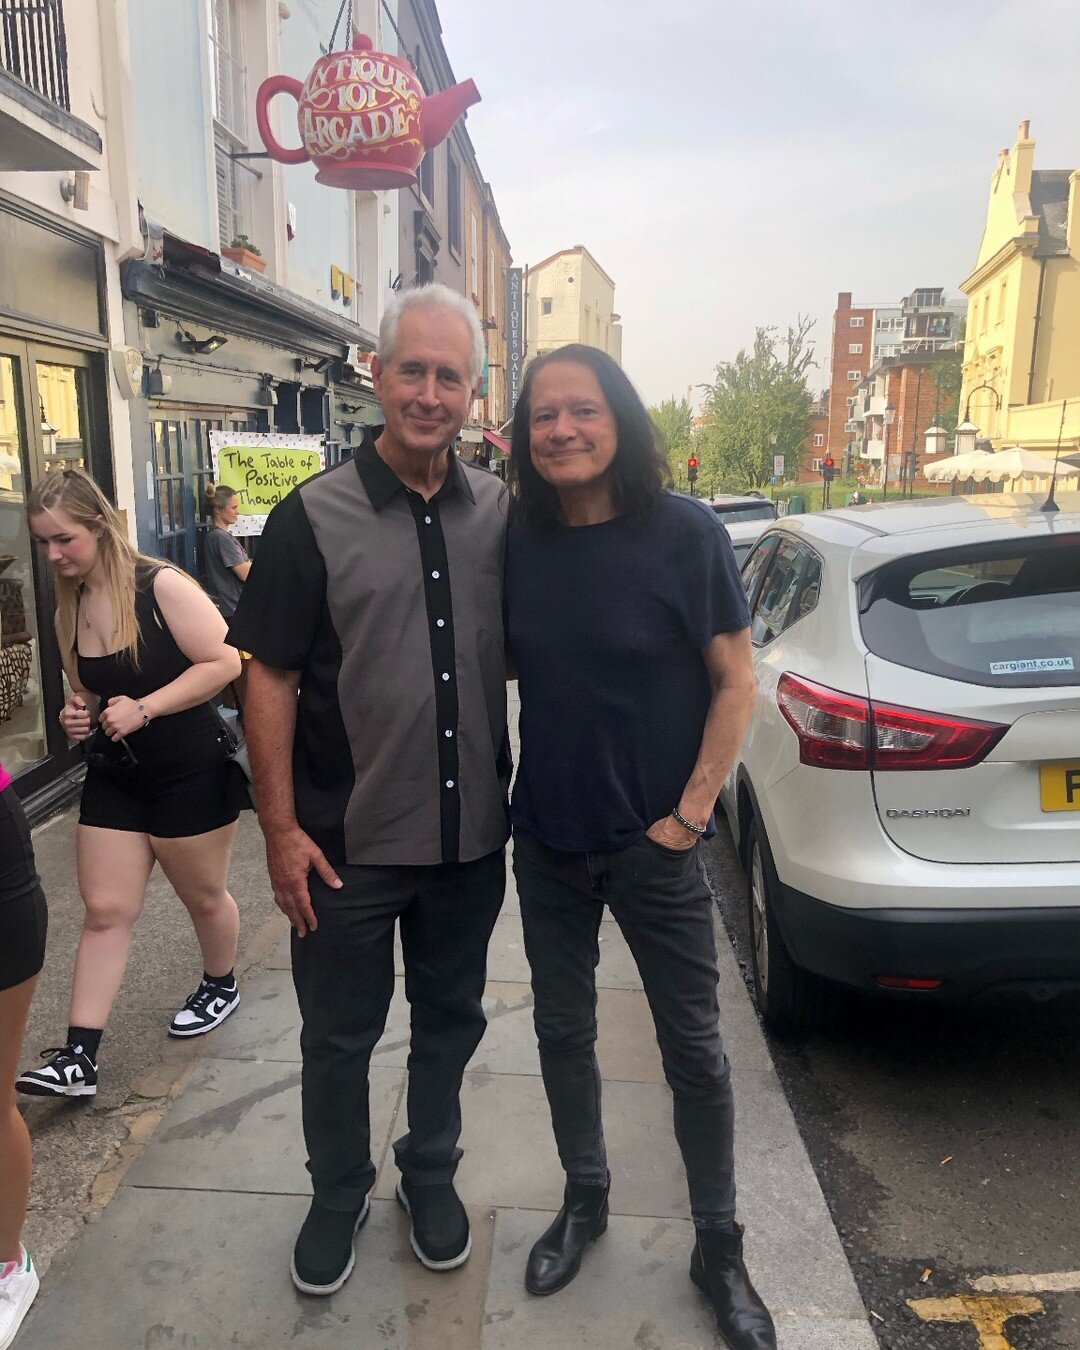 Hanging in London with my dear friend @david_nichtern, composer of &quot;Midnight At The Oasis&quot; and Dharma teacher.

@dharmamoonofficial